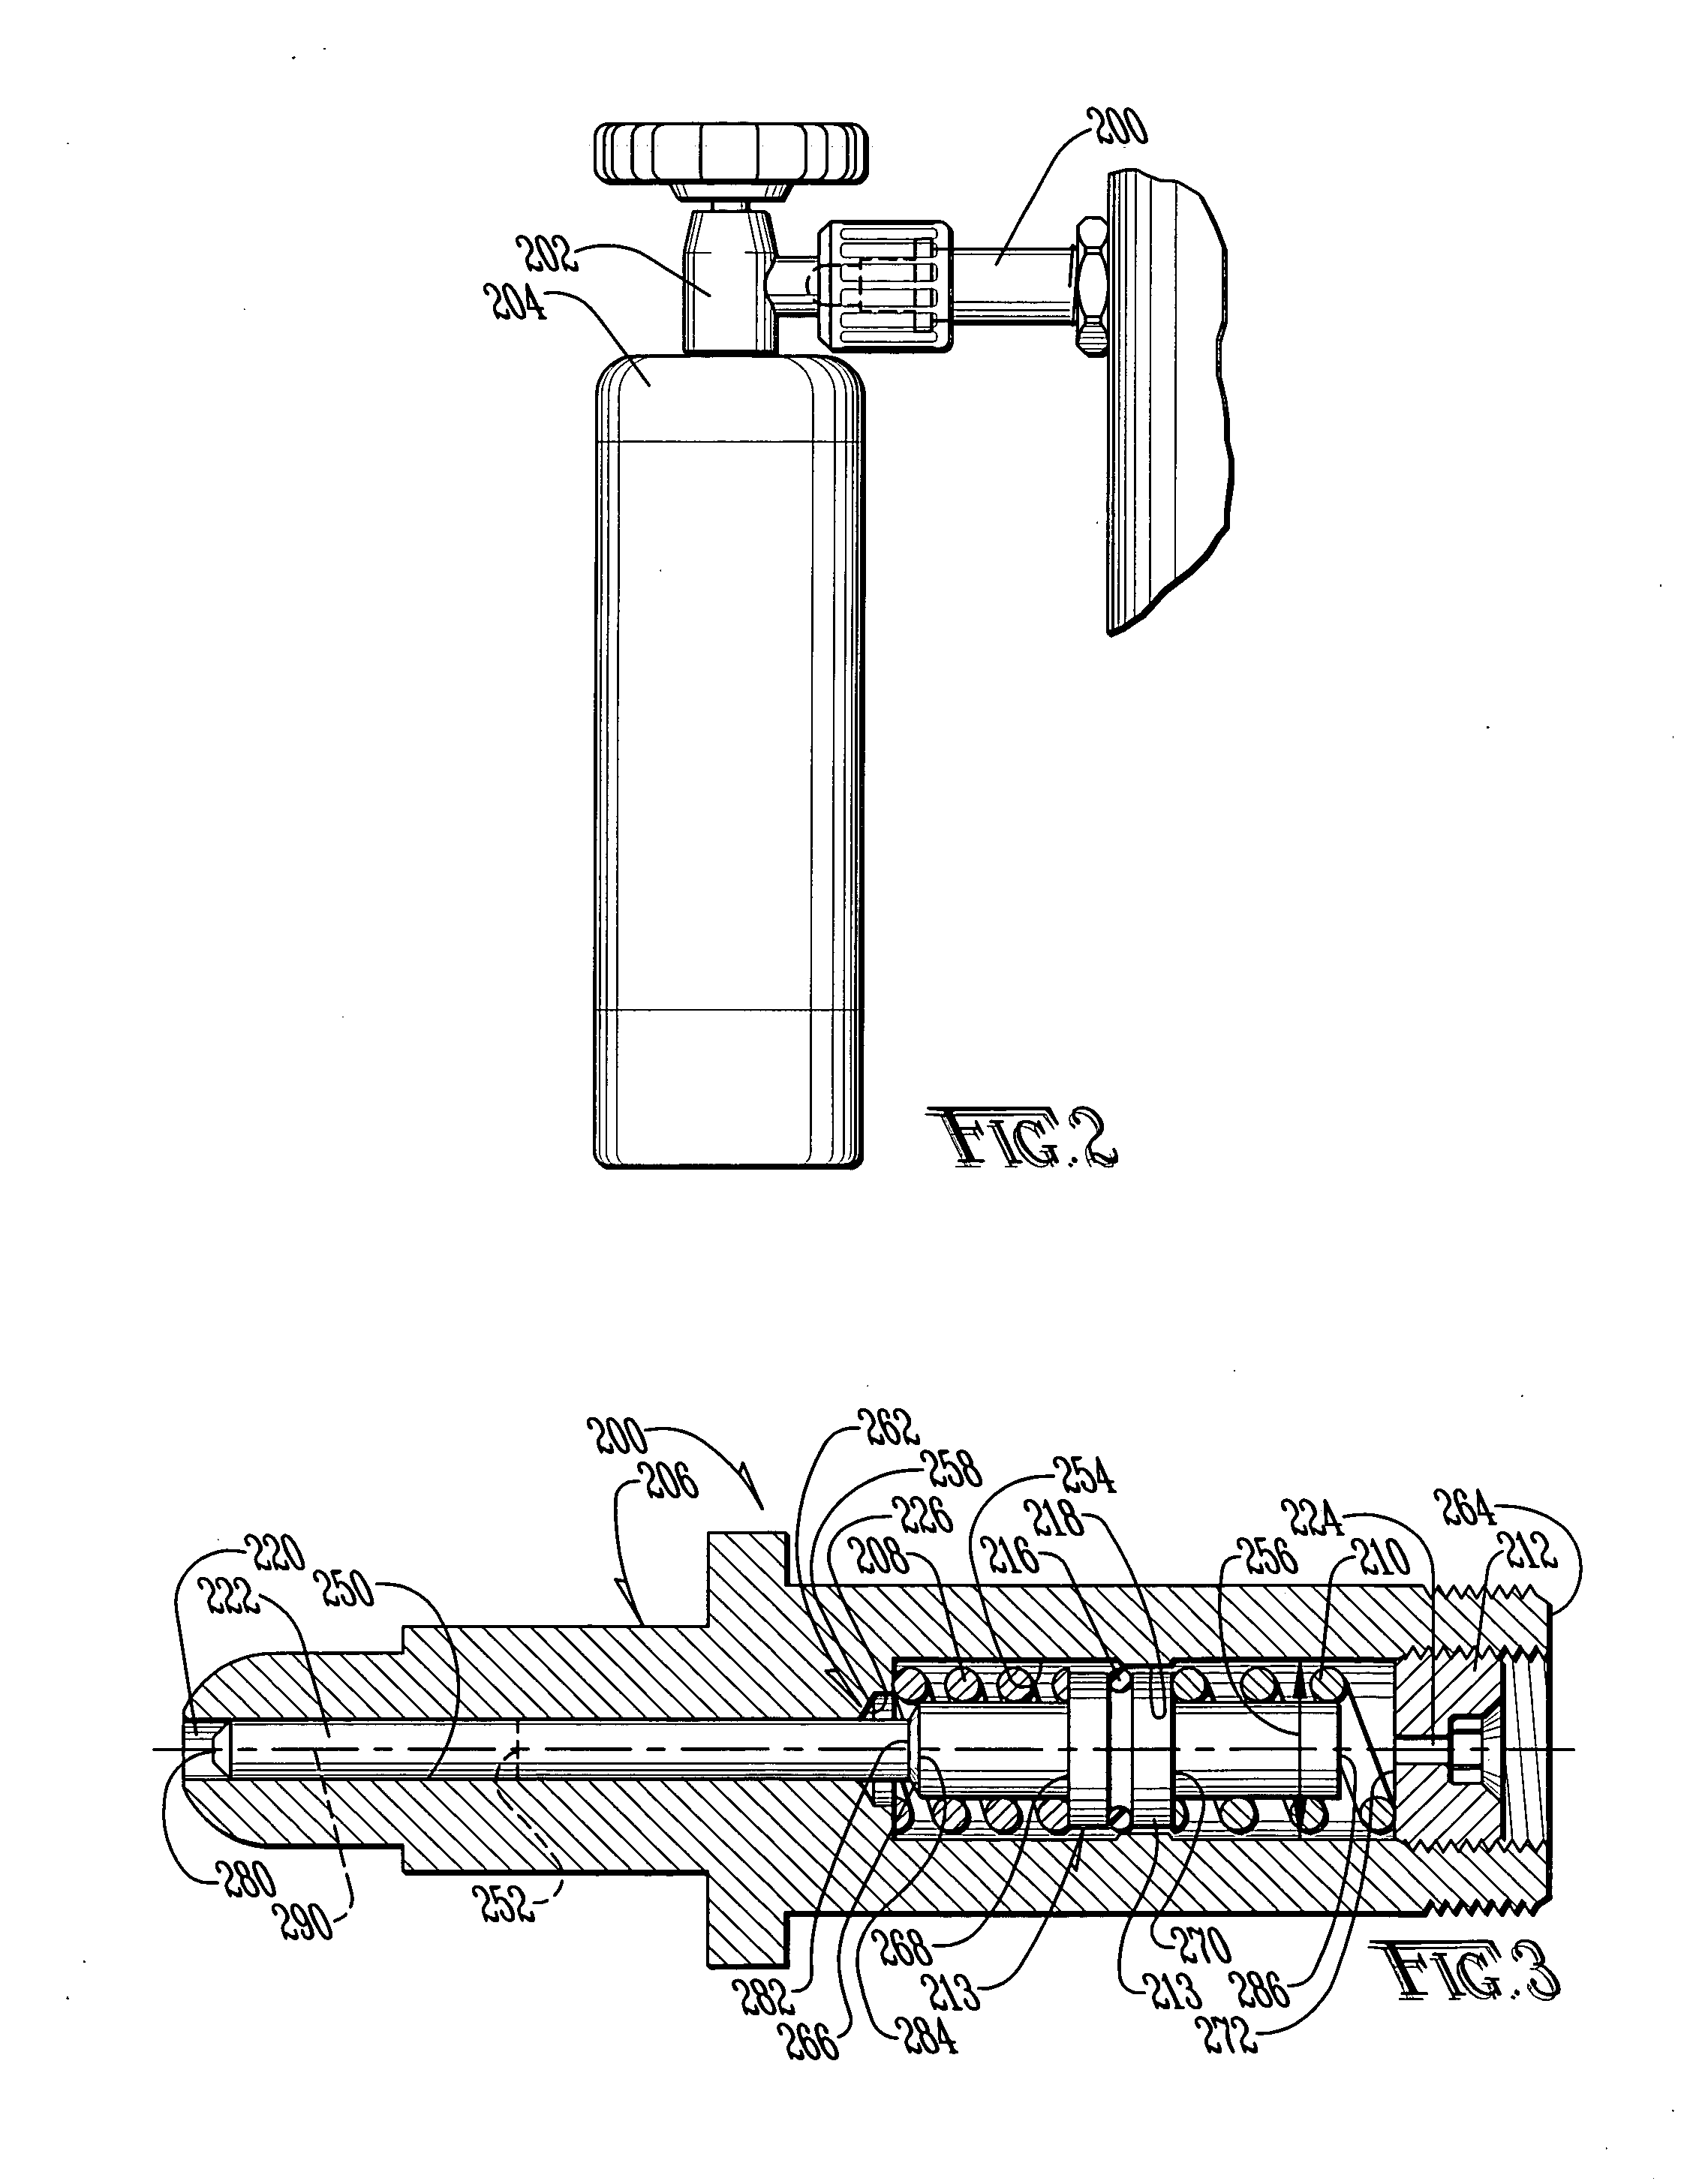 Method for purging a system for use in administrating therapeutic gas to a patient